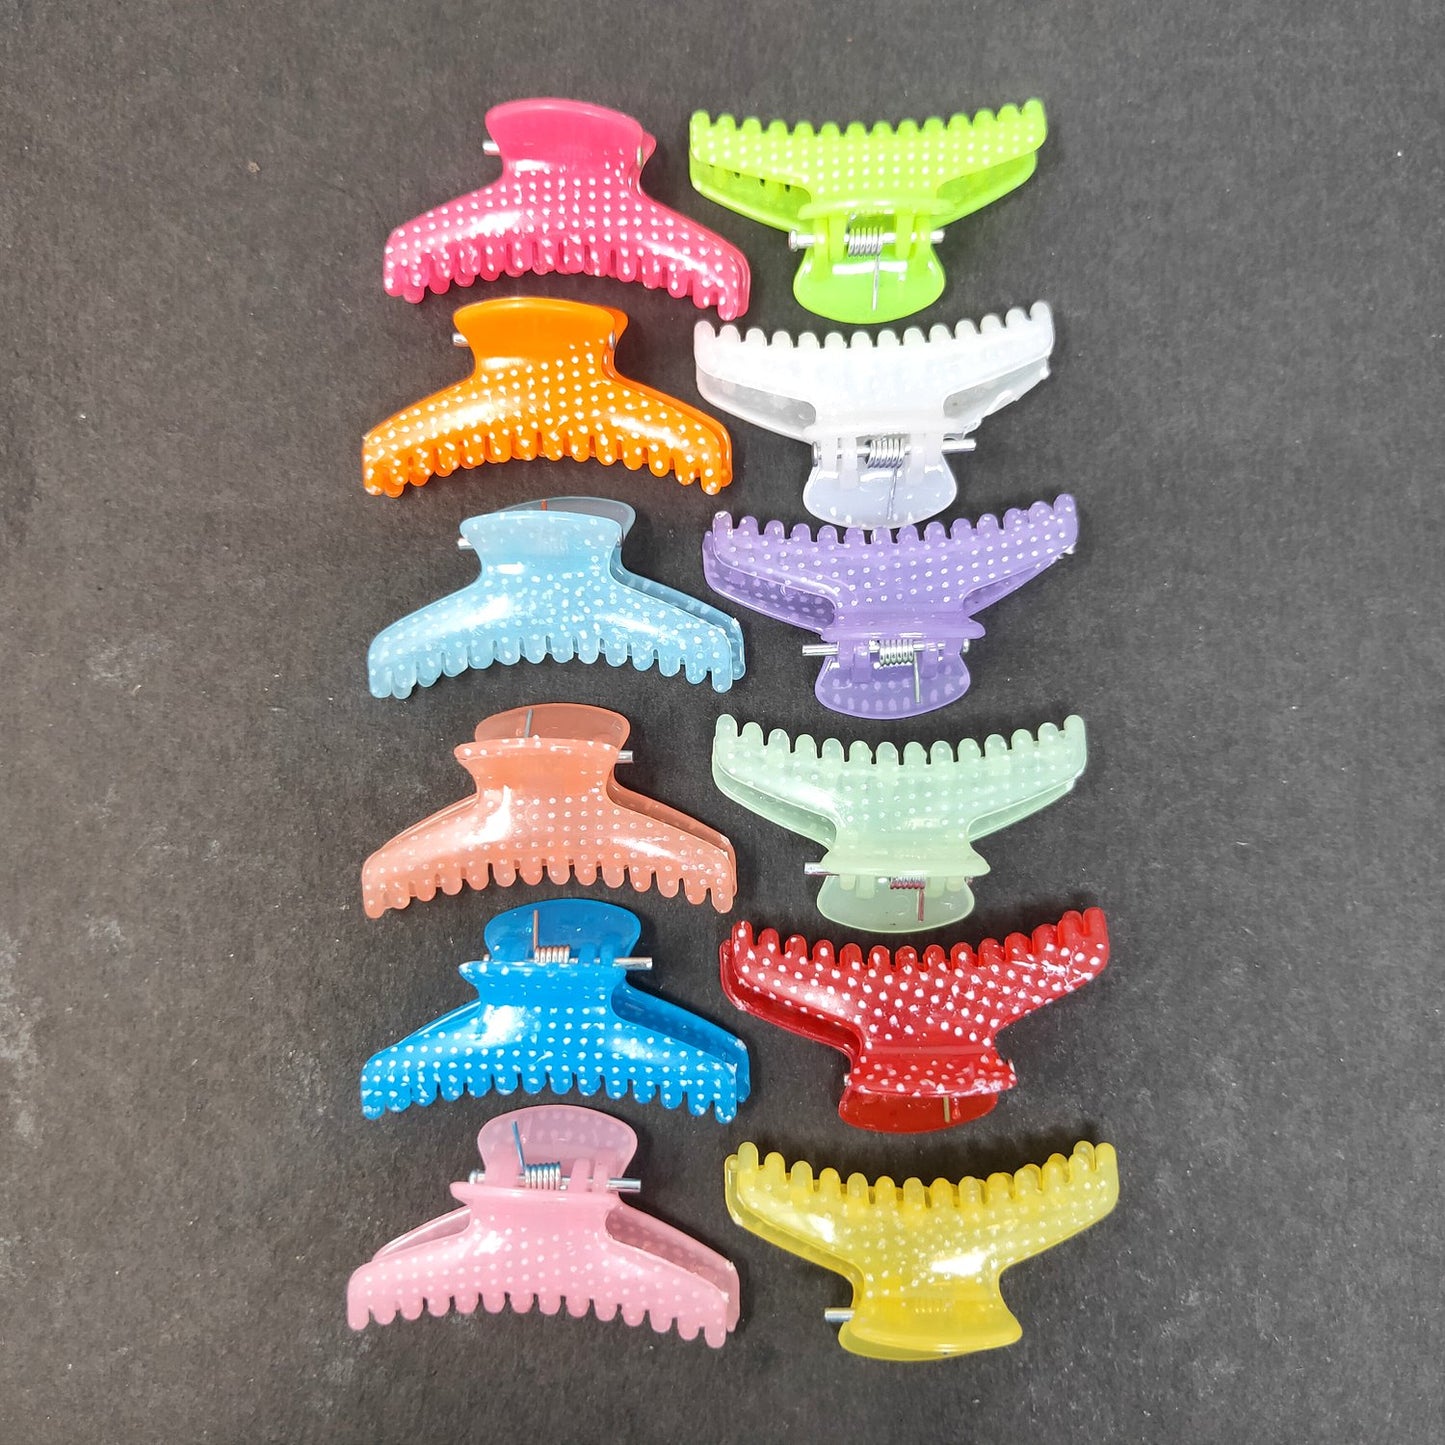 Anokhi Ada Translucent Plastic Small Hair Clutchers / Hair Claws for Girls and Women (Multi-Colour; Pack of 12) 95-04